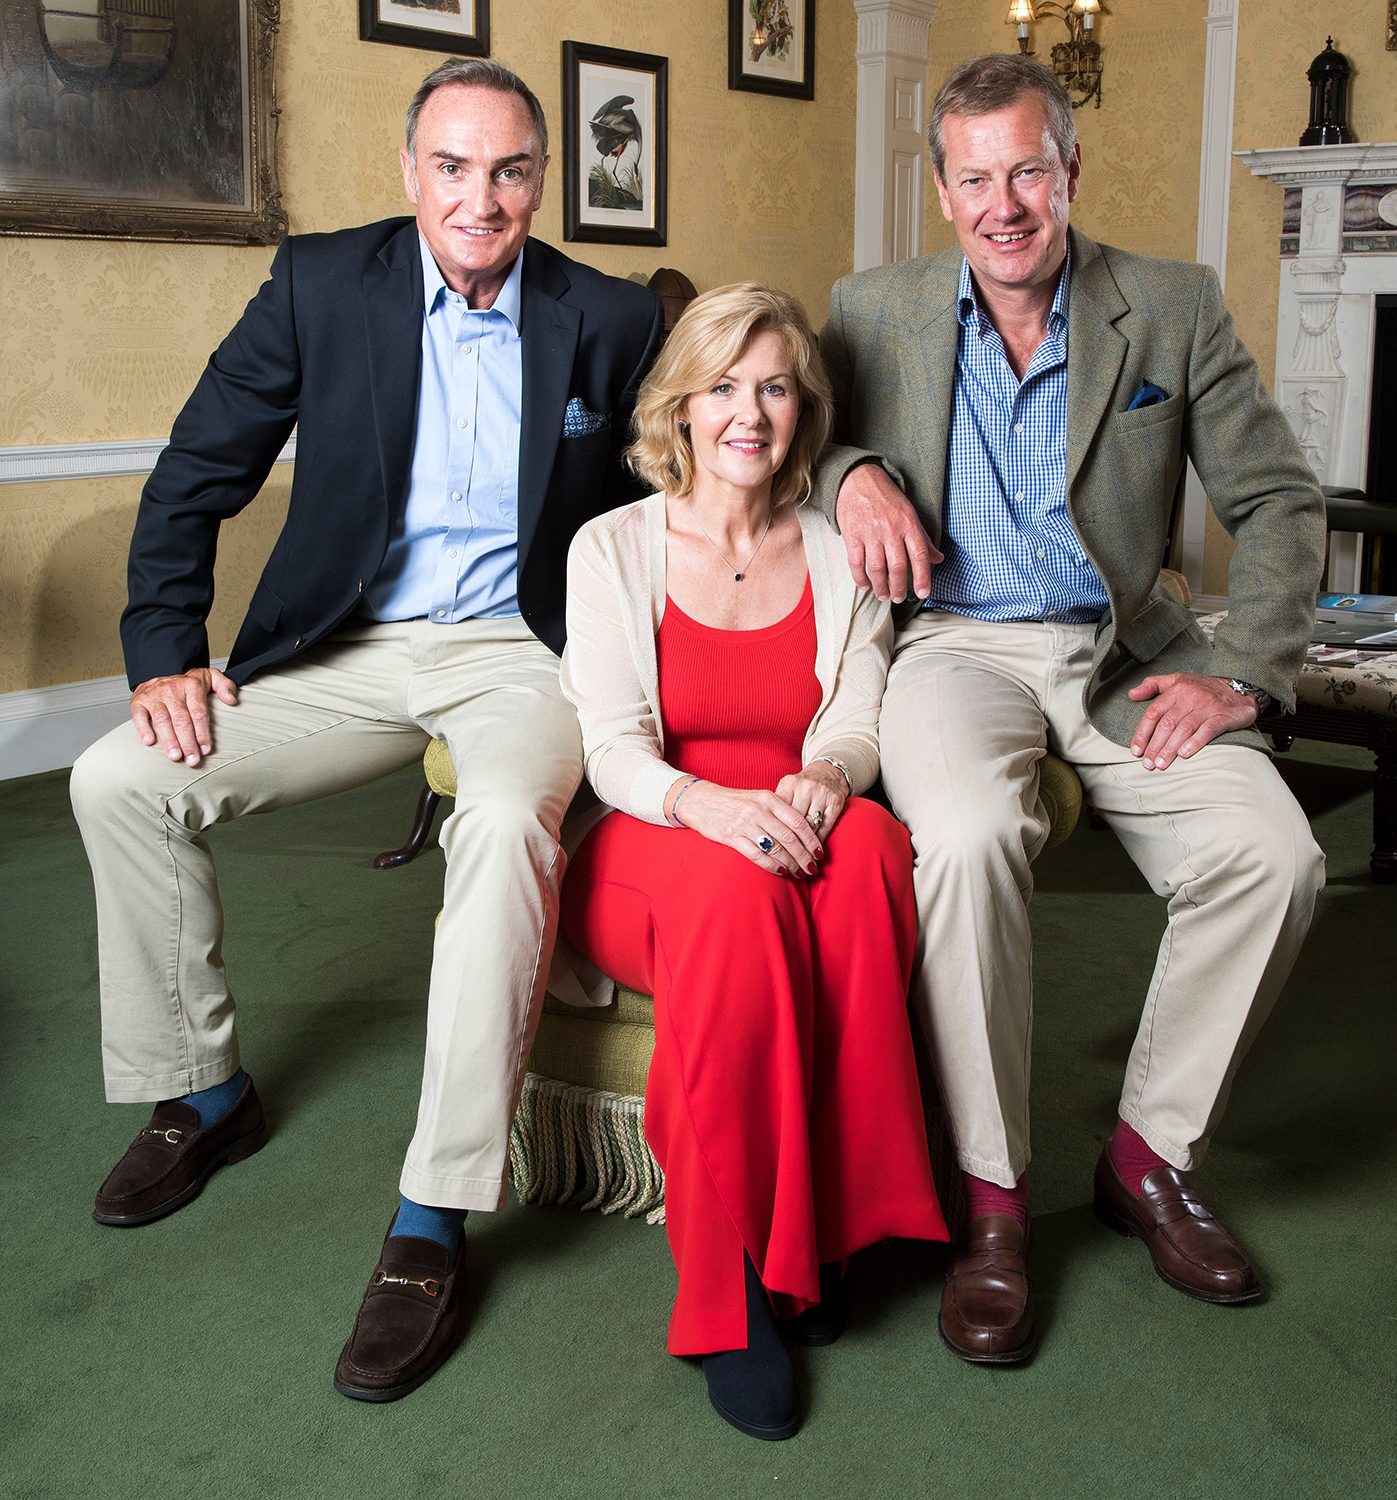 Lord Ivar Mountbatten (right) With His Fiancee James Coyle And Former Wife Lady Penny Mountbatten At Home In Uffculme Devon.